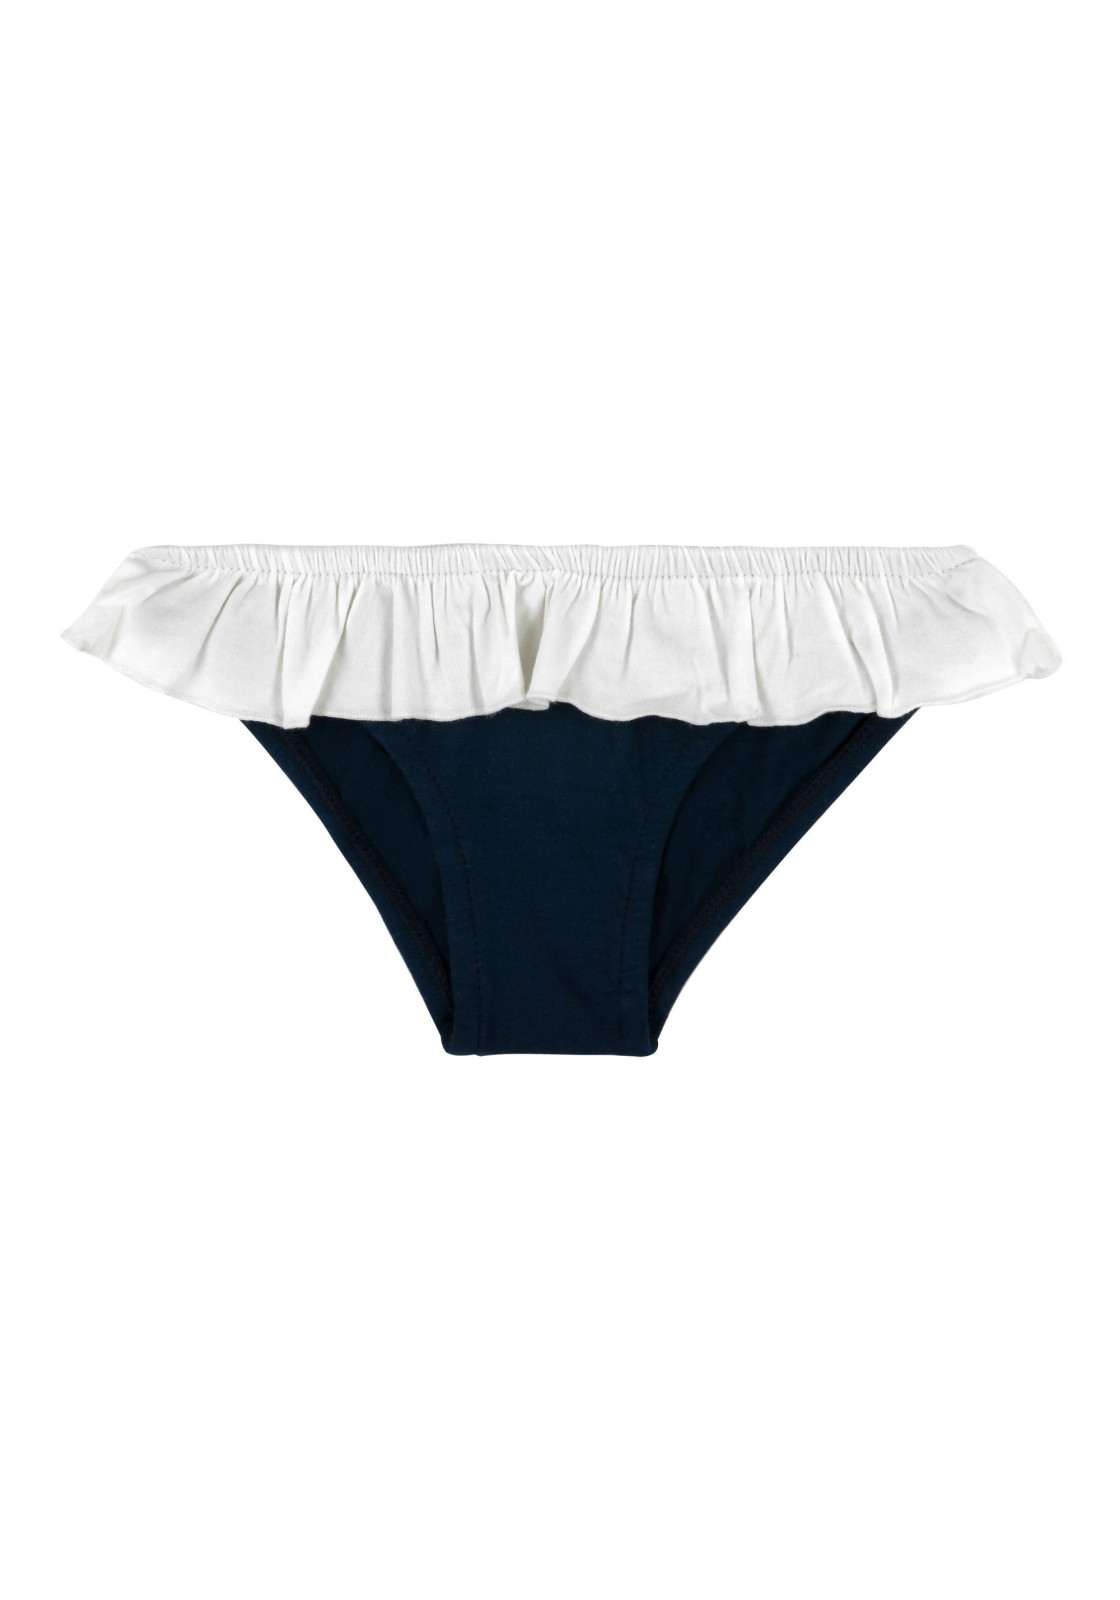 Swimsuit panties for girl iris and white ruffles Colour Iris - White Child  age 6 Colour Iris - White Child age 6